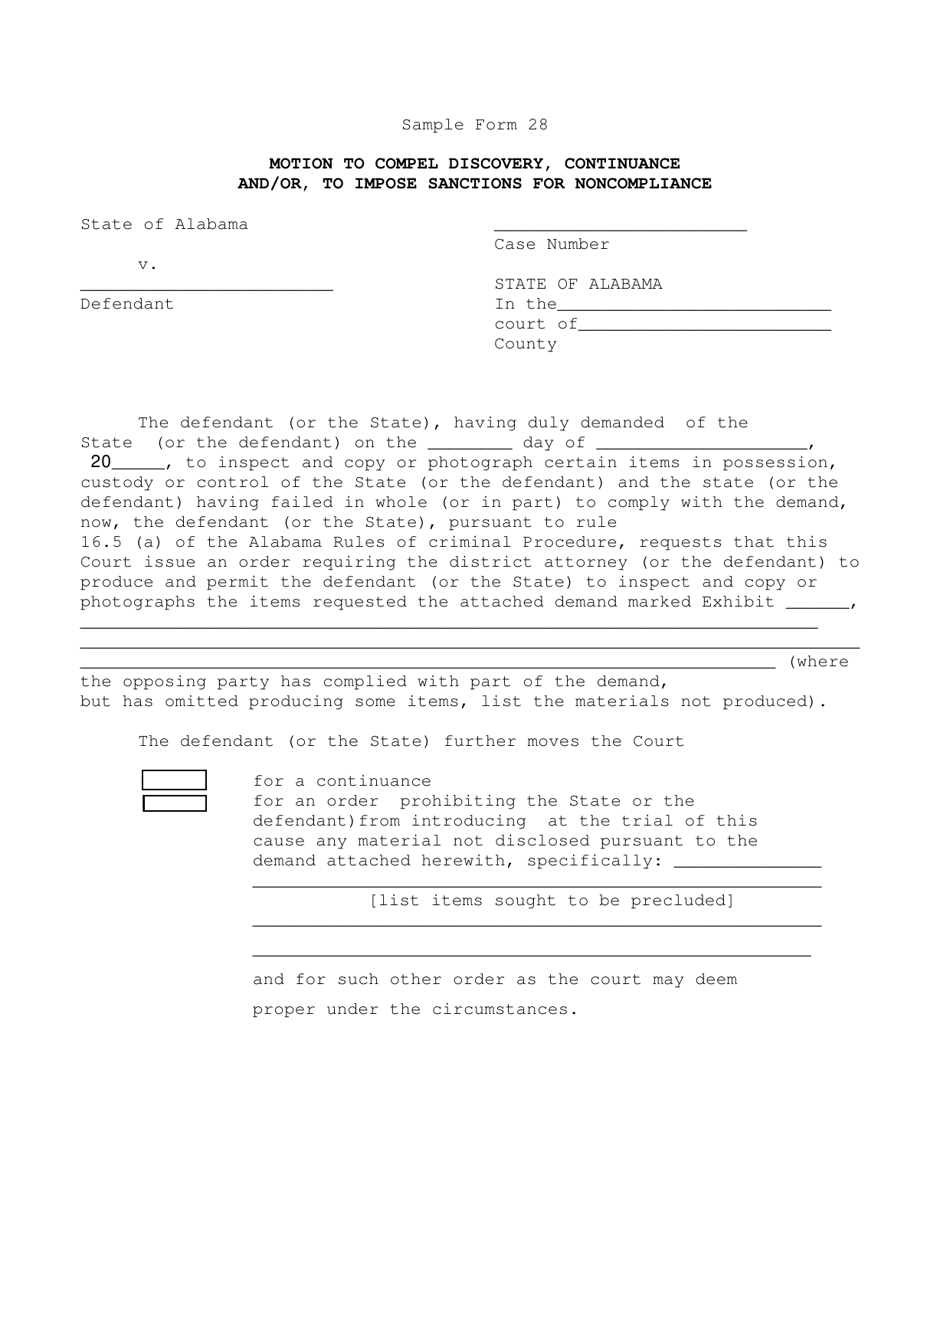 Sample Form 28 Motion to Compel Discovery, Continuance and / or, to Impose Sanctions for Noncompliance - Alabama, Page 1